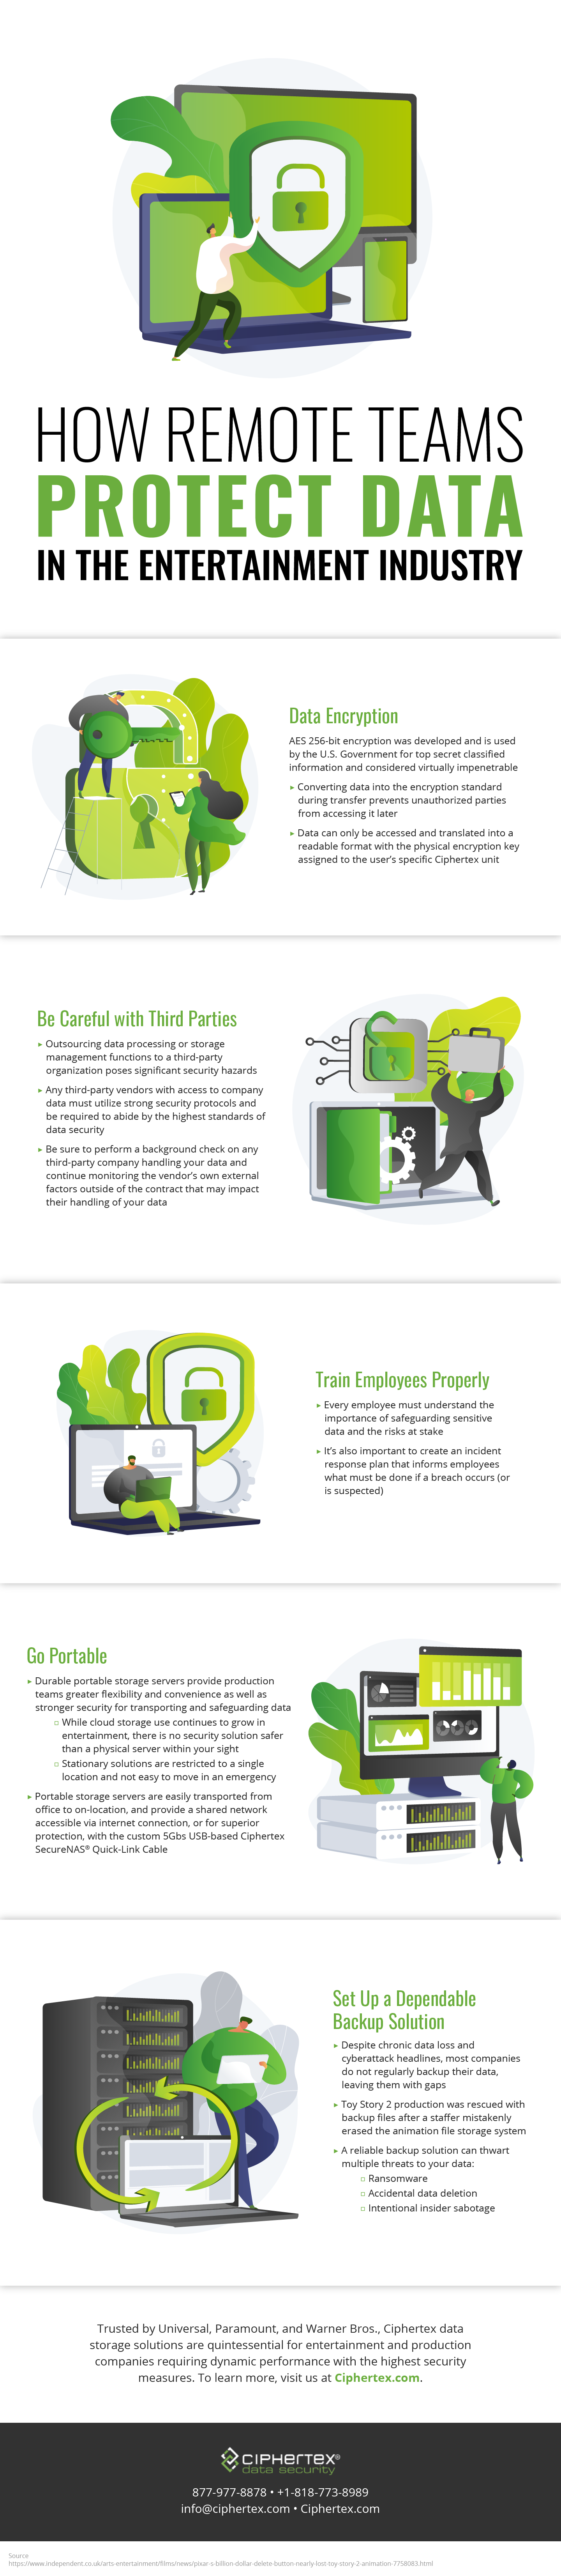 Protecting Data For Your Remote Teams in the Entertainment Industry Infographic